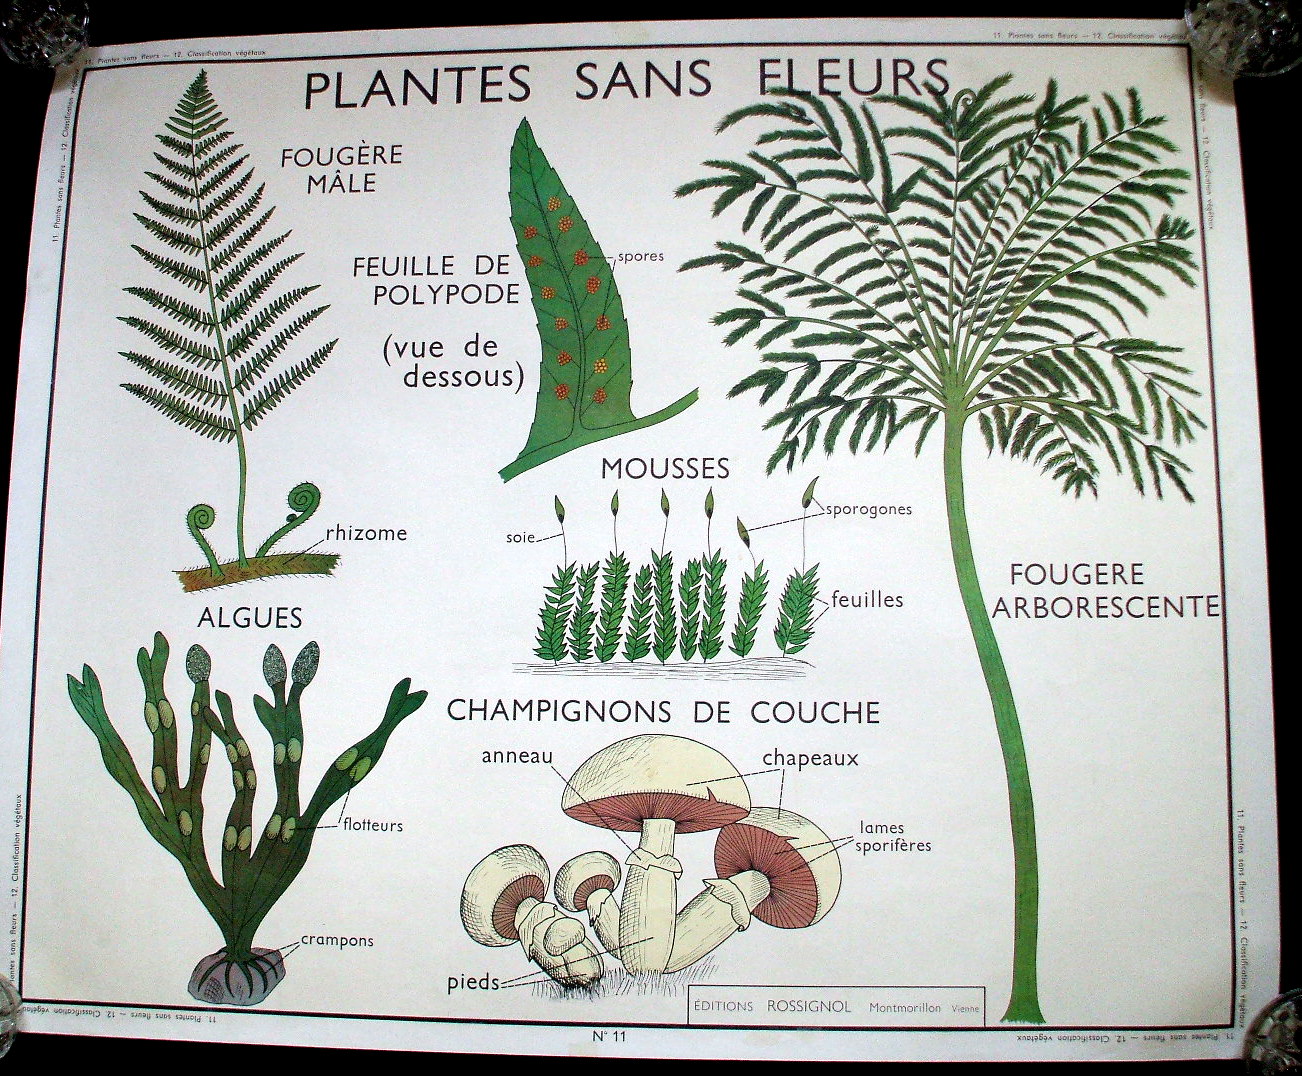 [French+vintage+school+poster+botanical+plant+french+wall+le+trip.JPG]